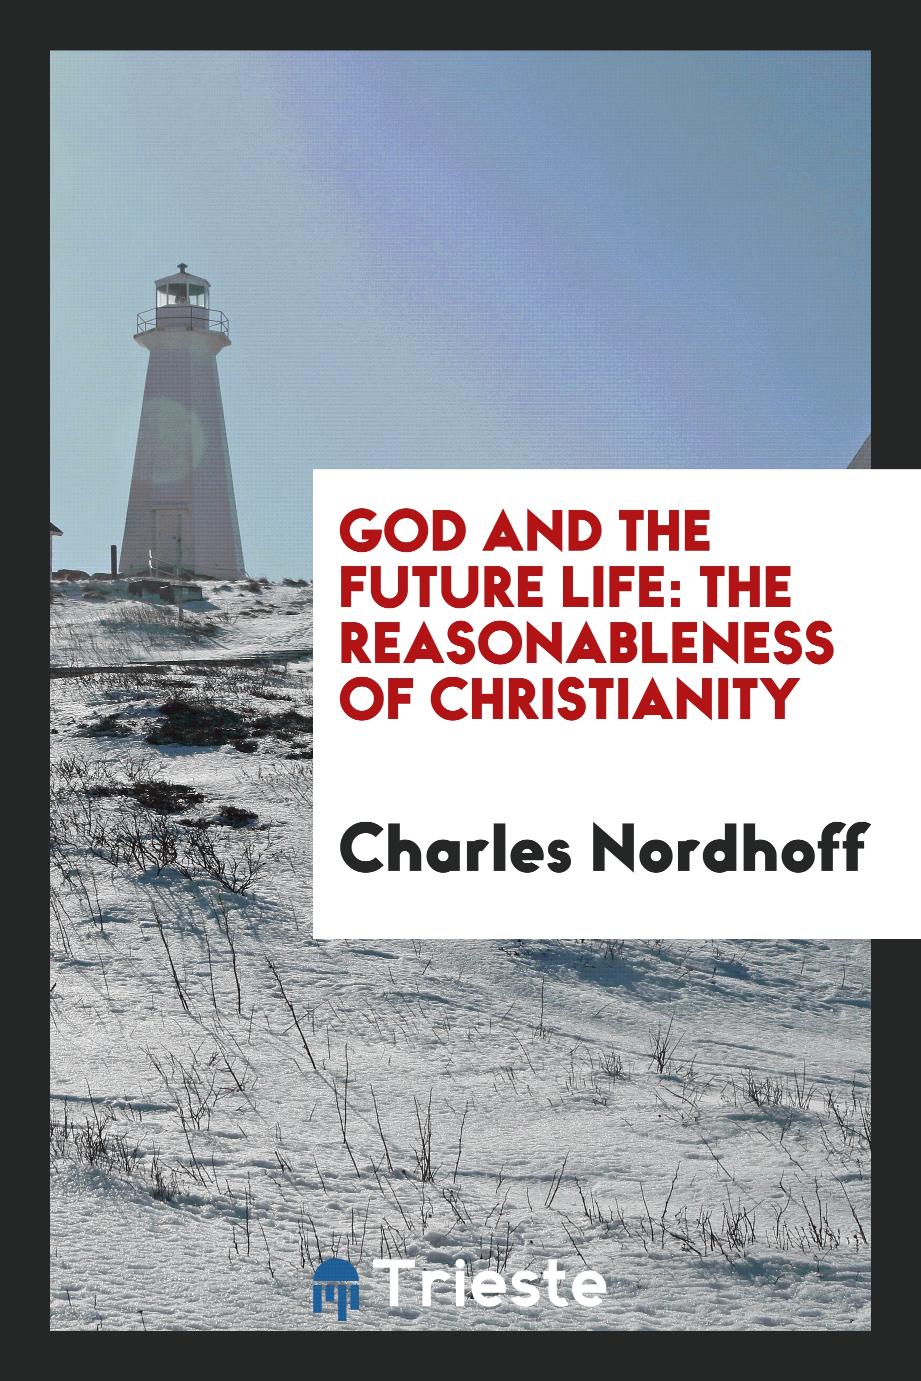 God and the future life: the reasonableness of christianity